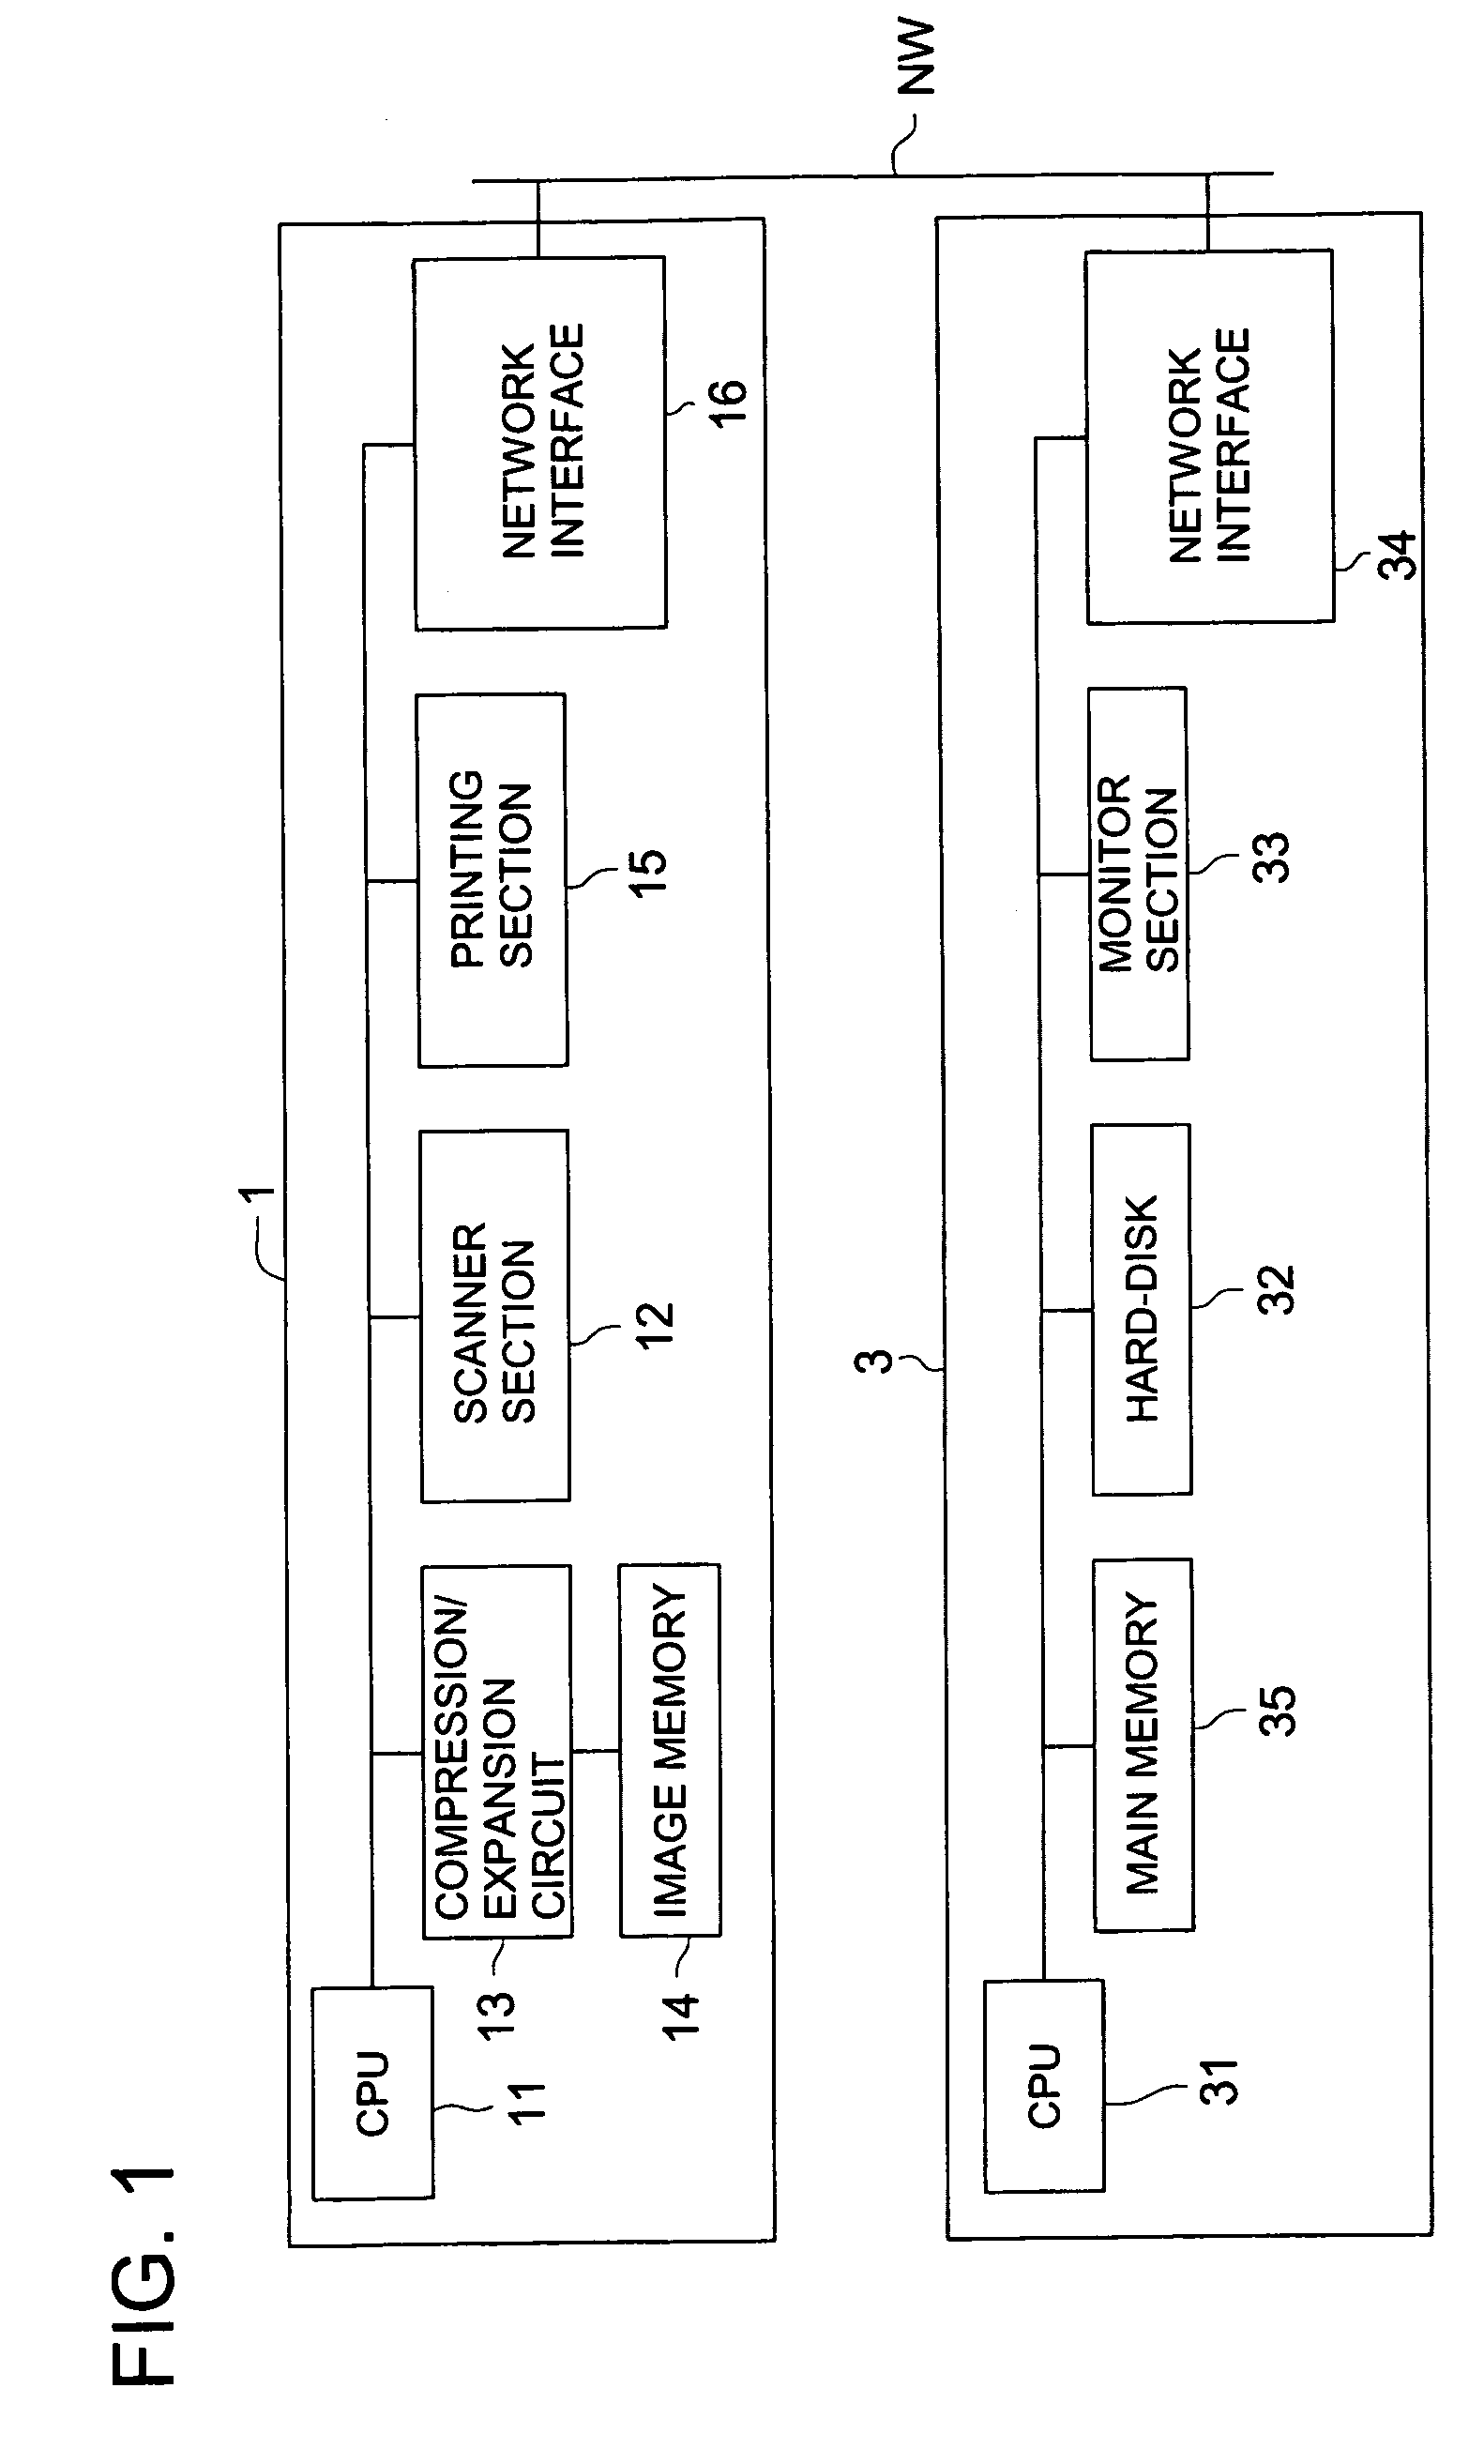 Image forming system, method for storing image data and memory media